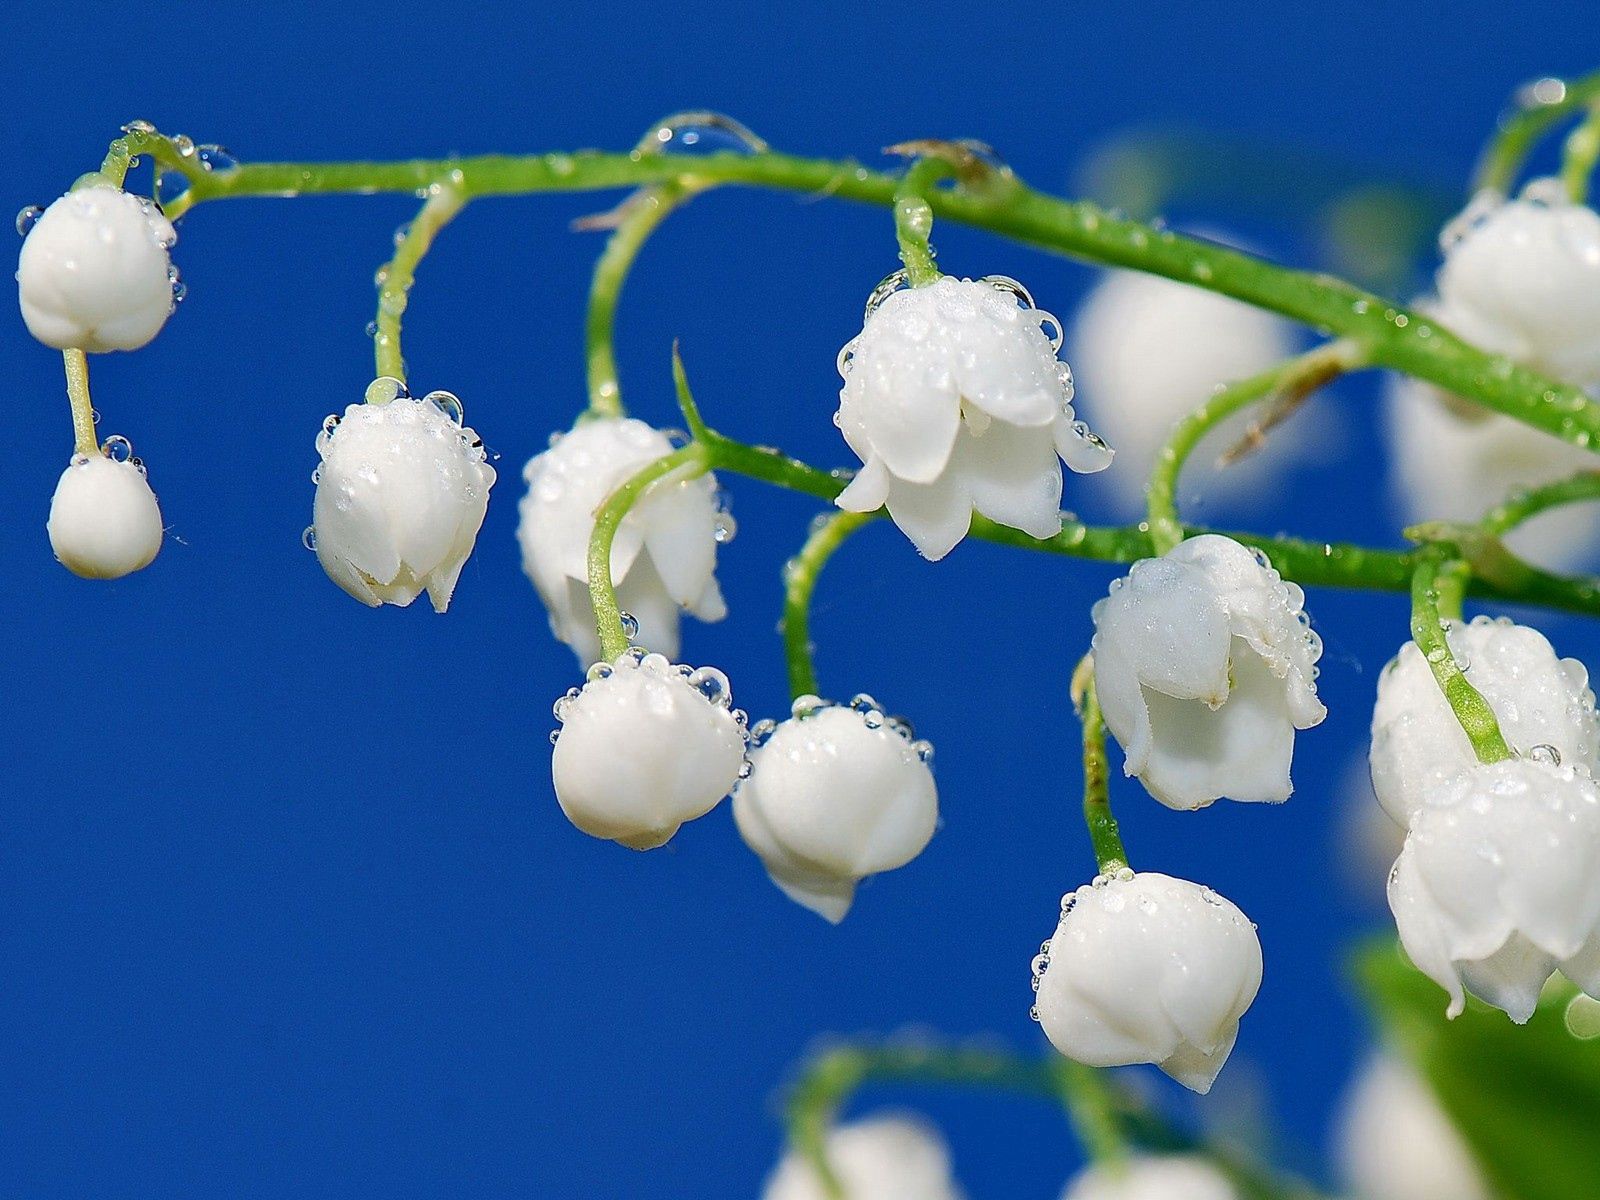 1080p Lily Of The Valley Hd Images